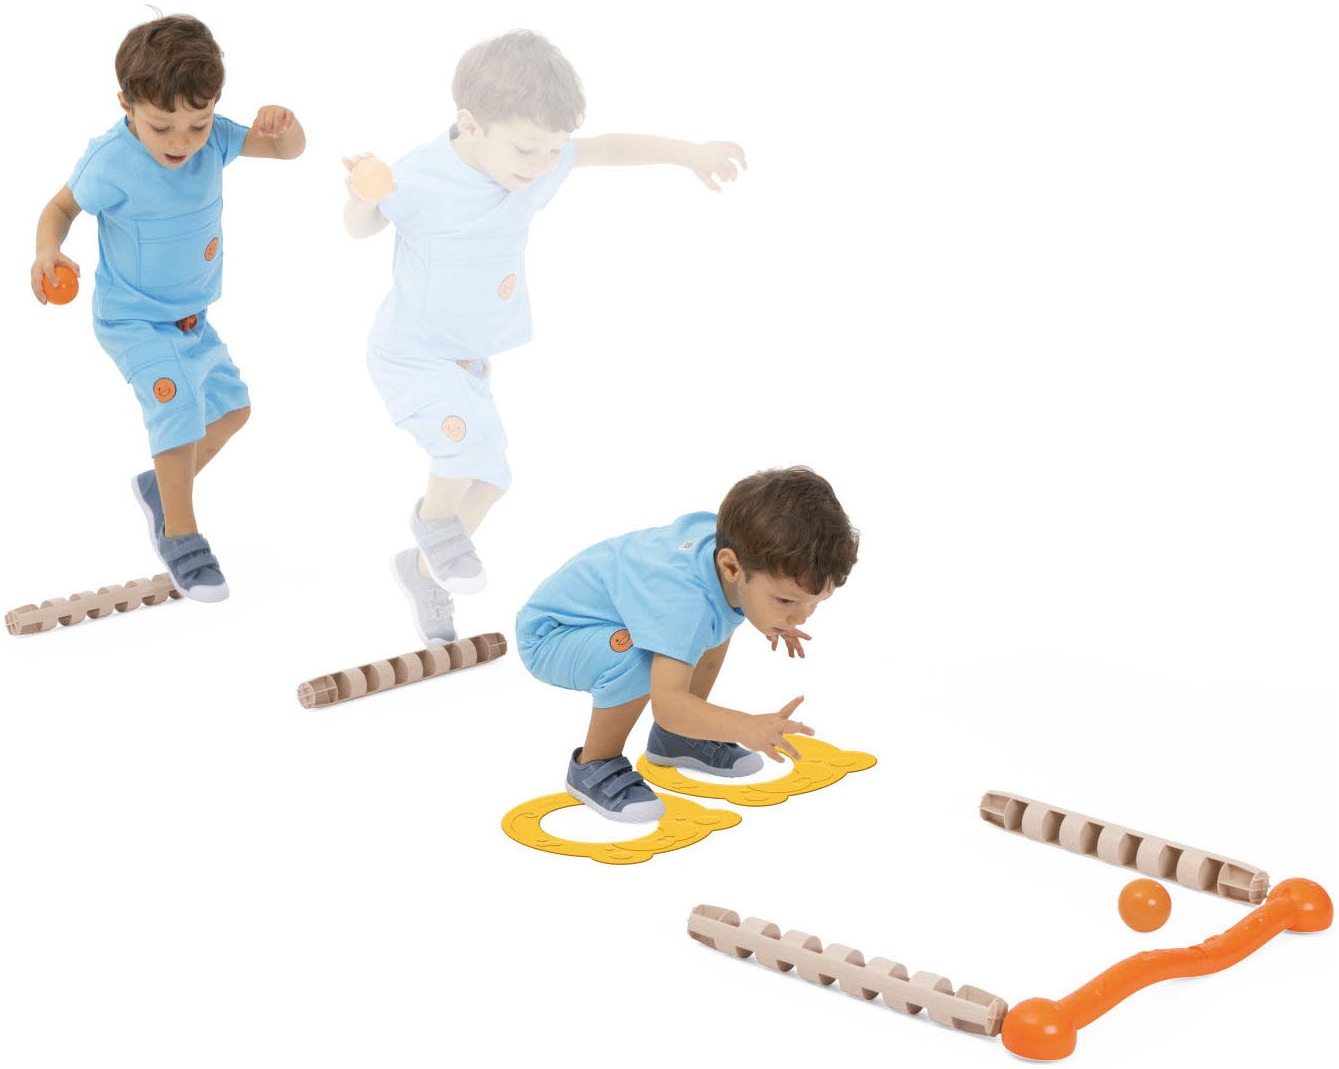 Chicco Lernspielzeug »Spielset My First Moves«, Made in Europe